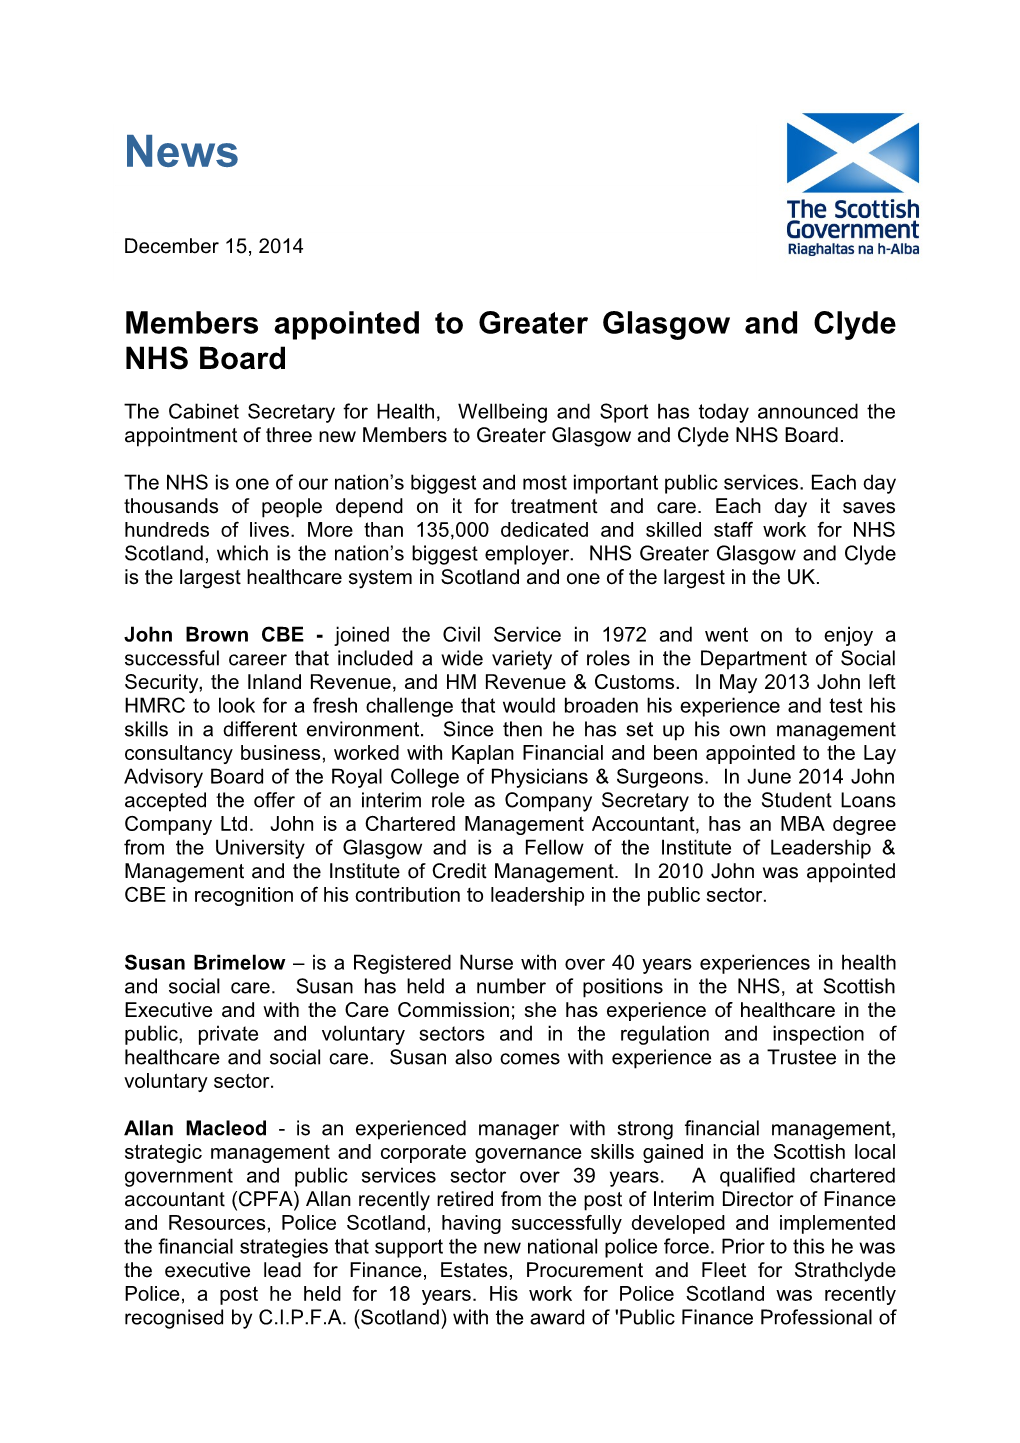 Members Appointed to Greater Glasgow and Clyde NHS Board